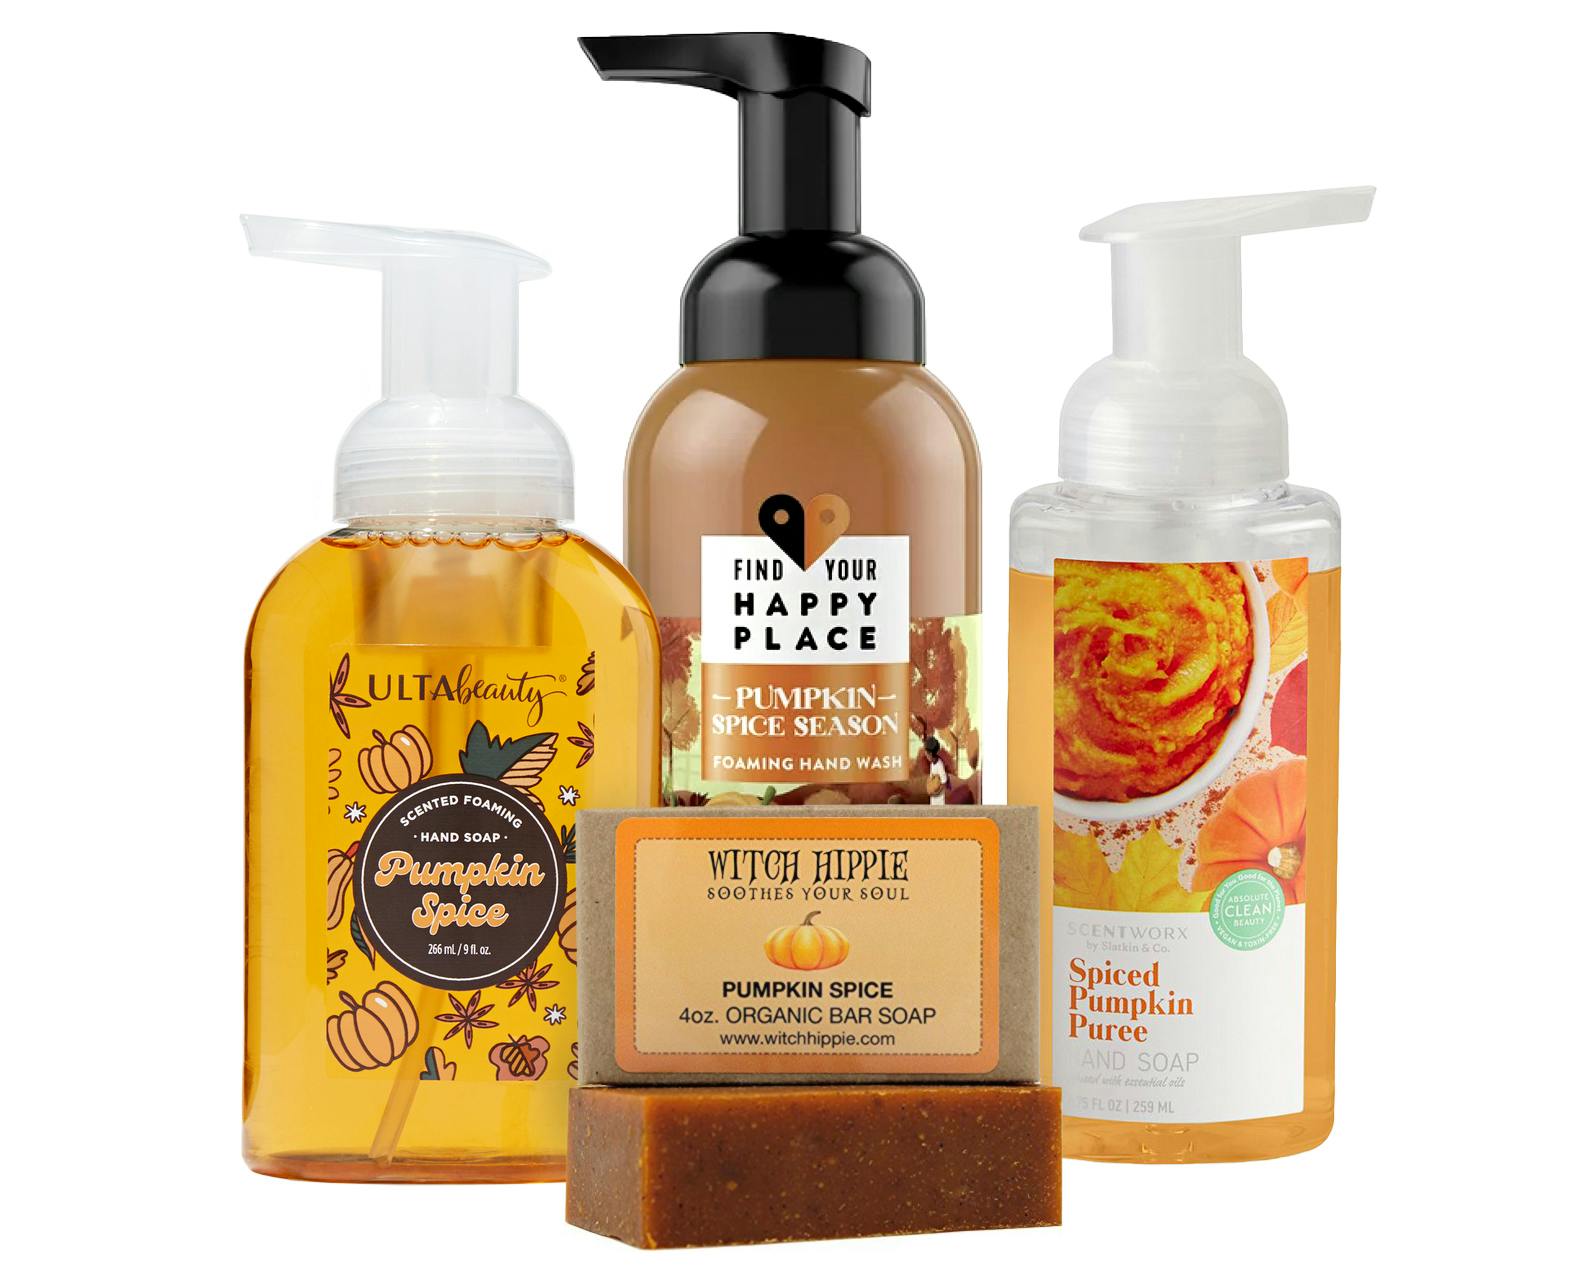 pumpkin spice-scented hand soap products